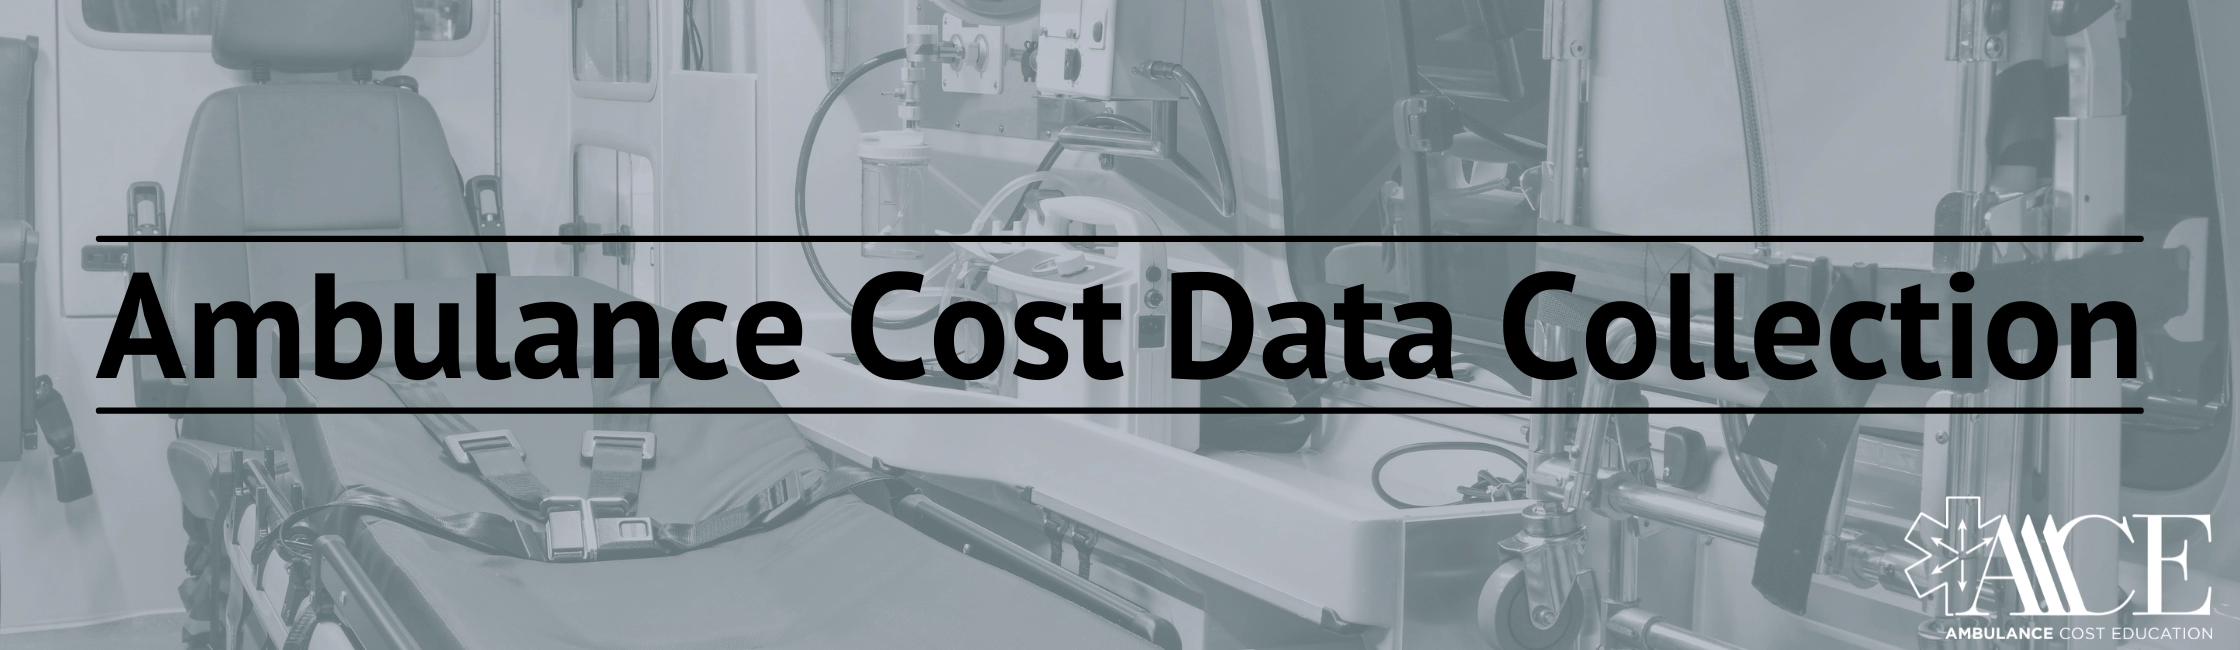 What is Ambulance Cost Data Collection?